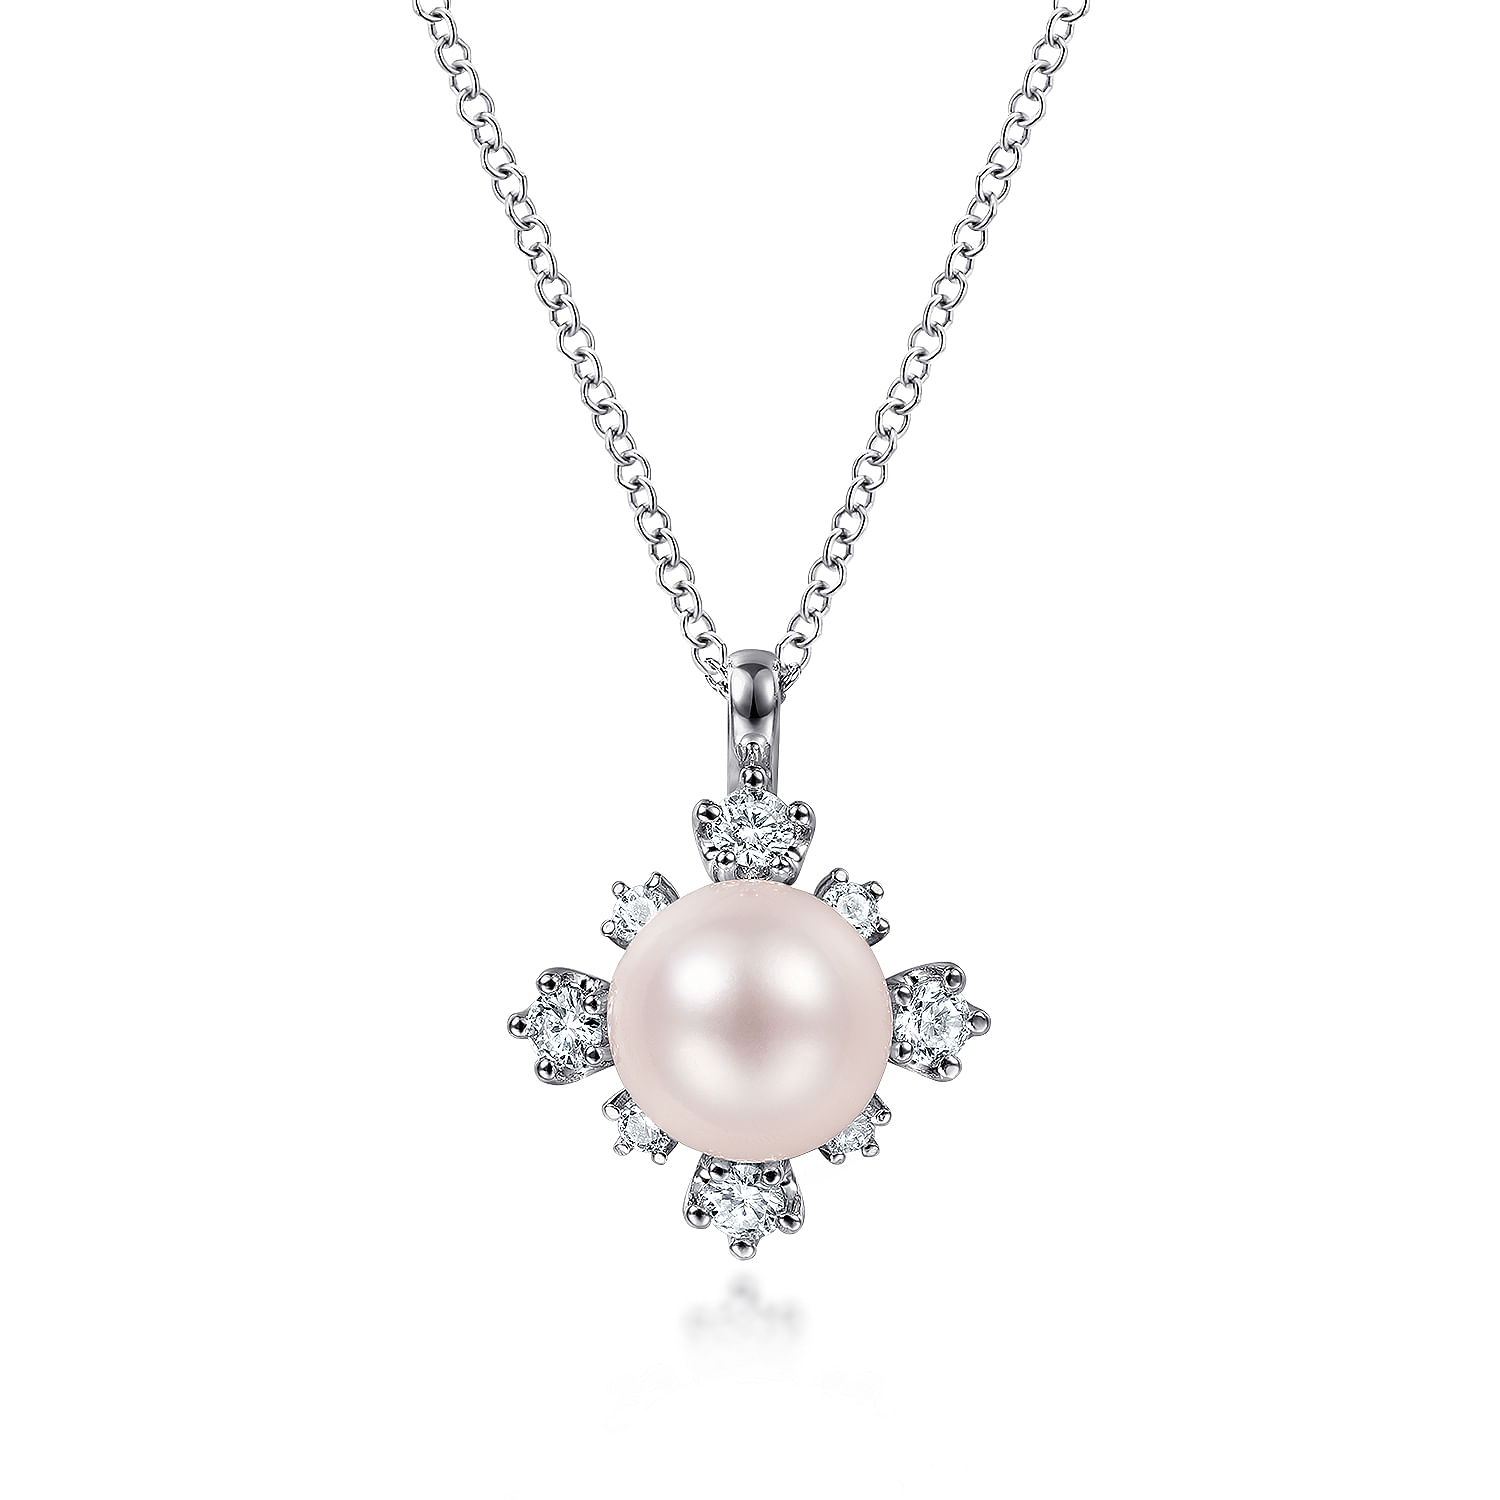 Gabriel - 14K White Gold Round Pearl Pendant Necklace with Diamond Accents